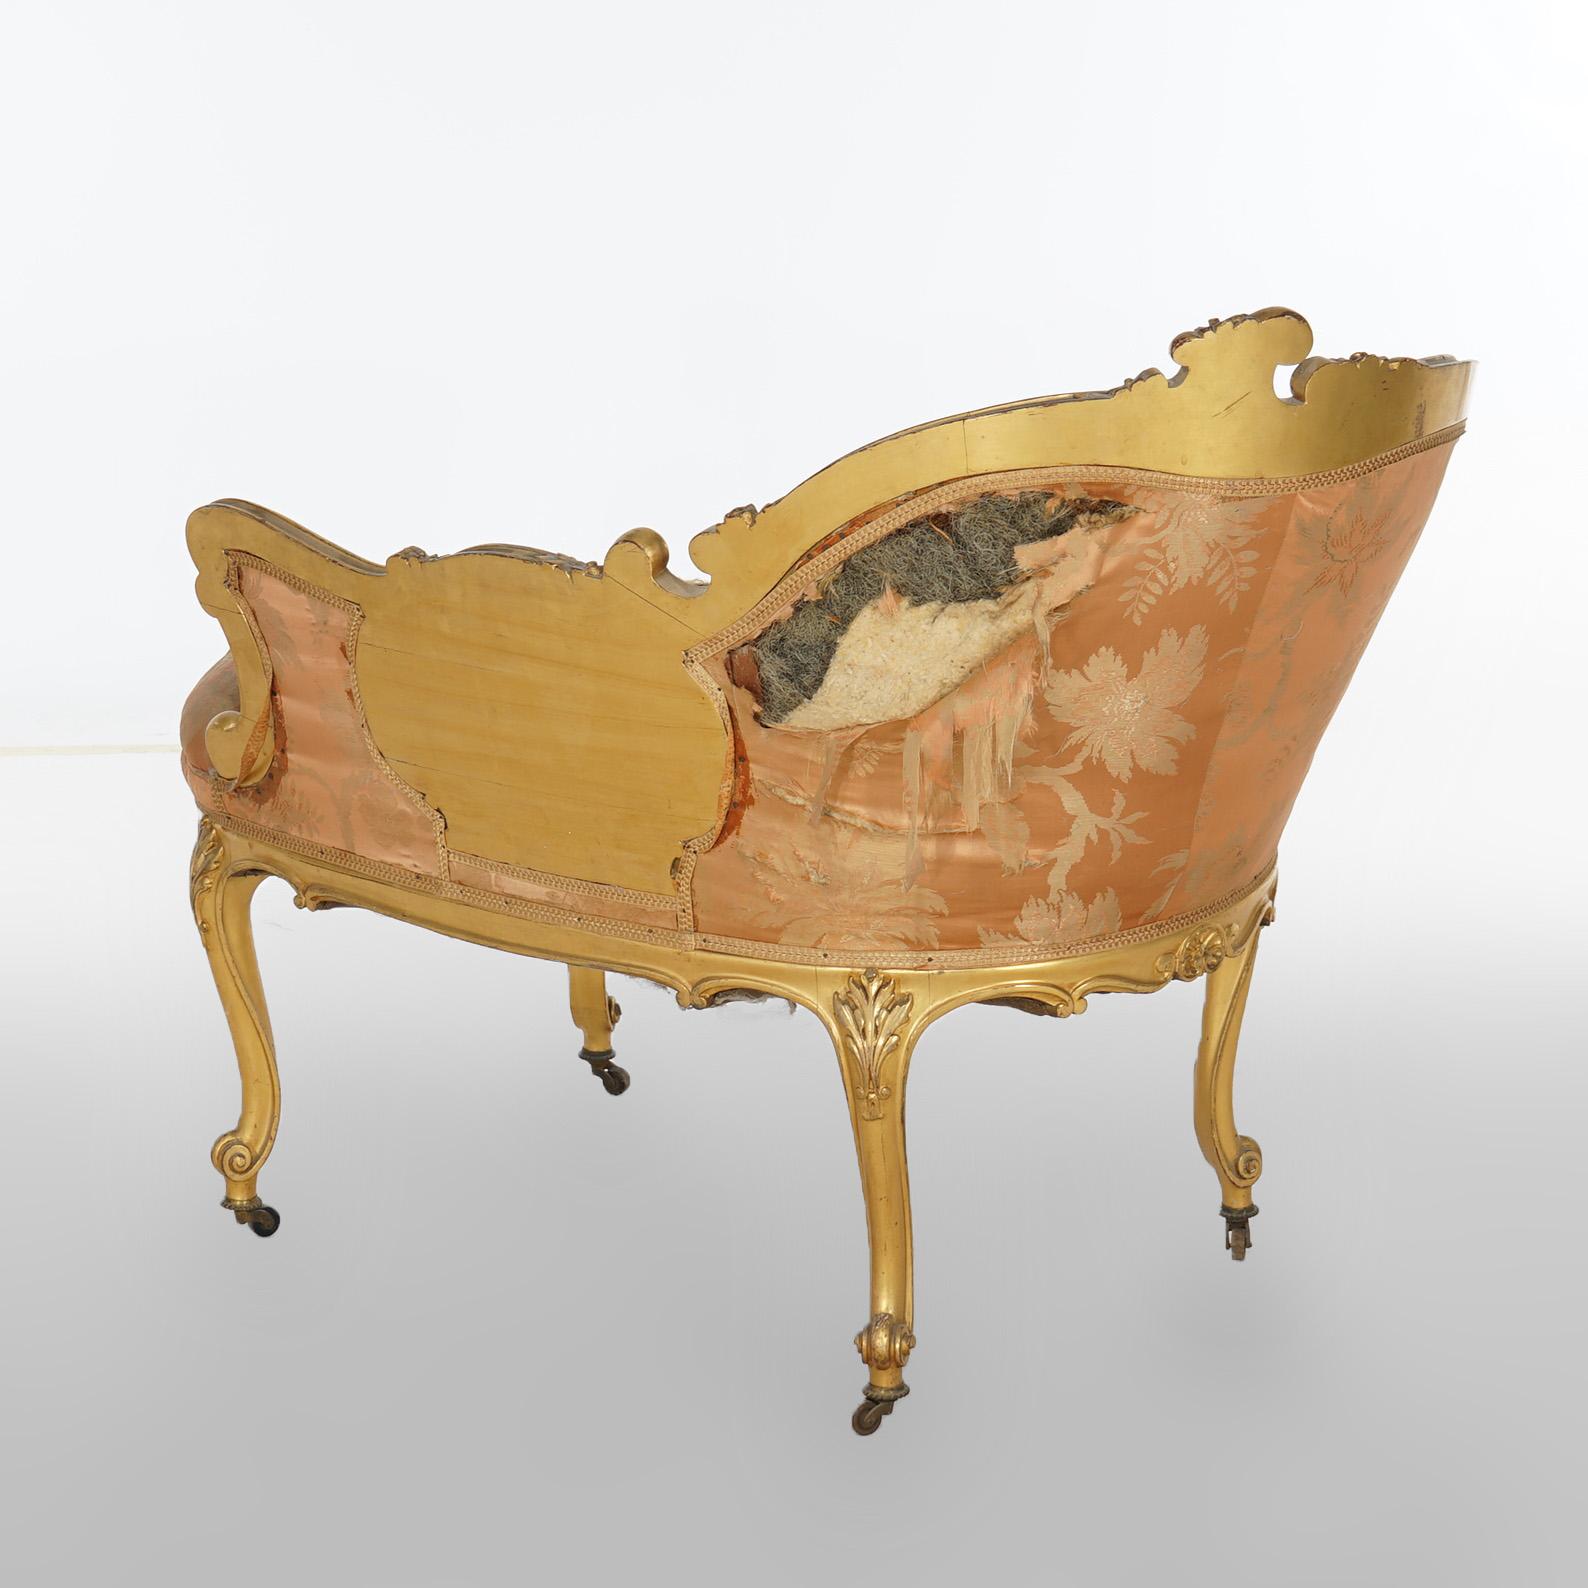 Early Antique French Rococo Vernis Martin & Giltwood Half-Recamier Settee 19th C For Sale 4